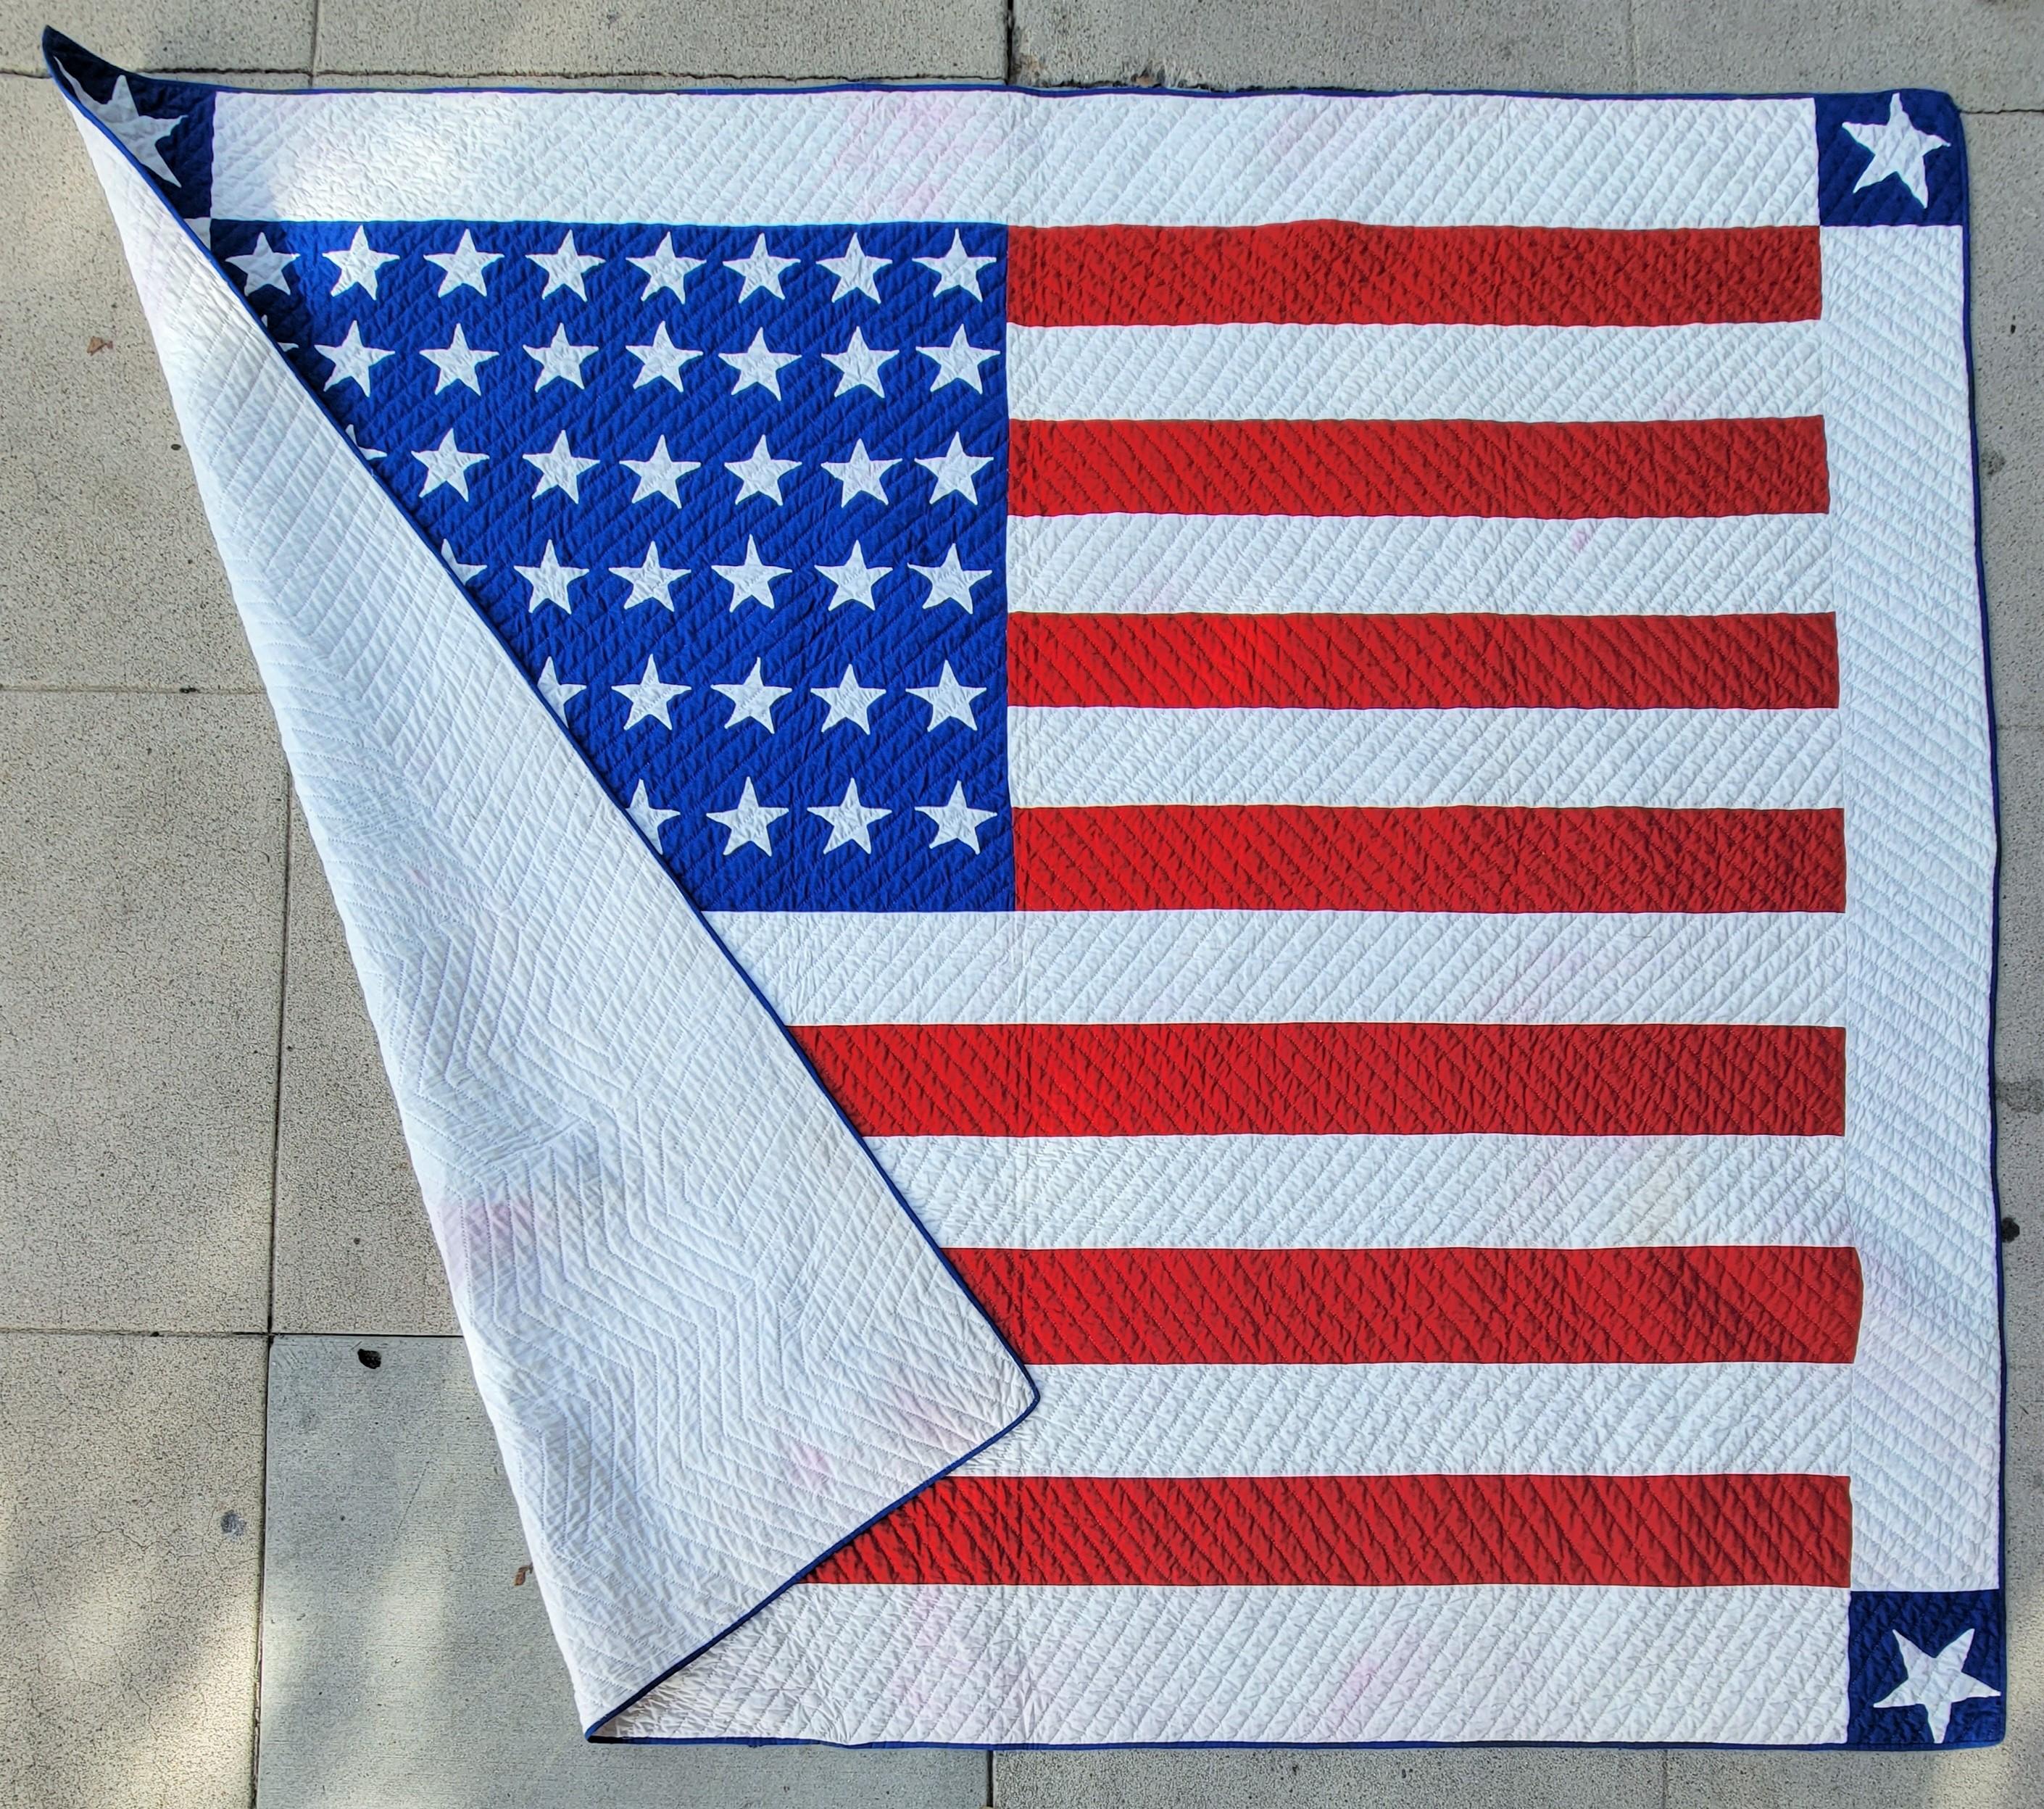 This amazing flag quilt with 48 hand quilted stars is in amazing condition. It is a one of a kind flag quilt. We sold this quilt over 21 years ago and got it back from the original buyer / collector. We bought it back from the original collector. It